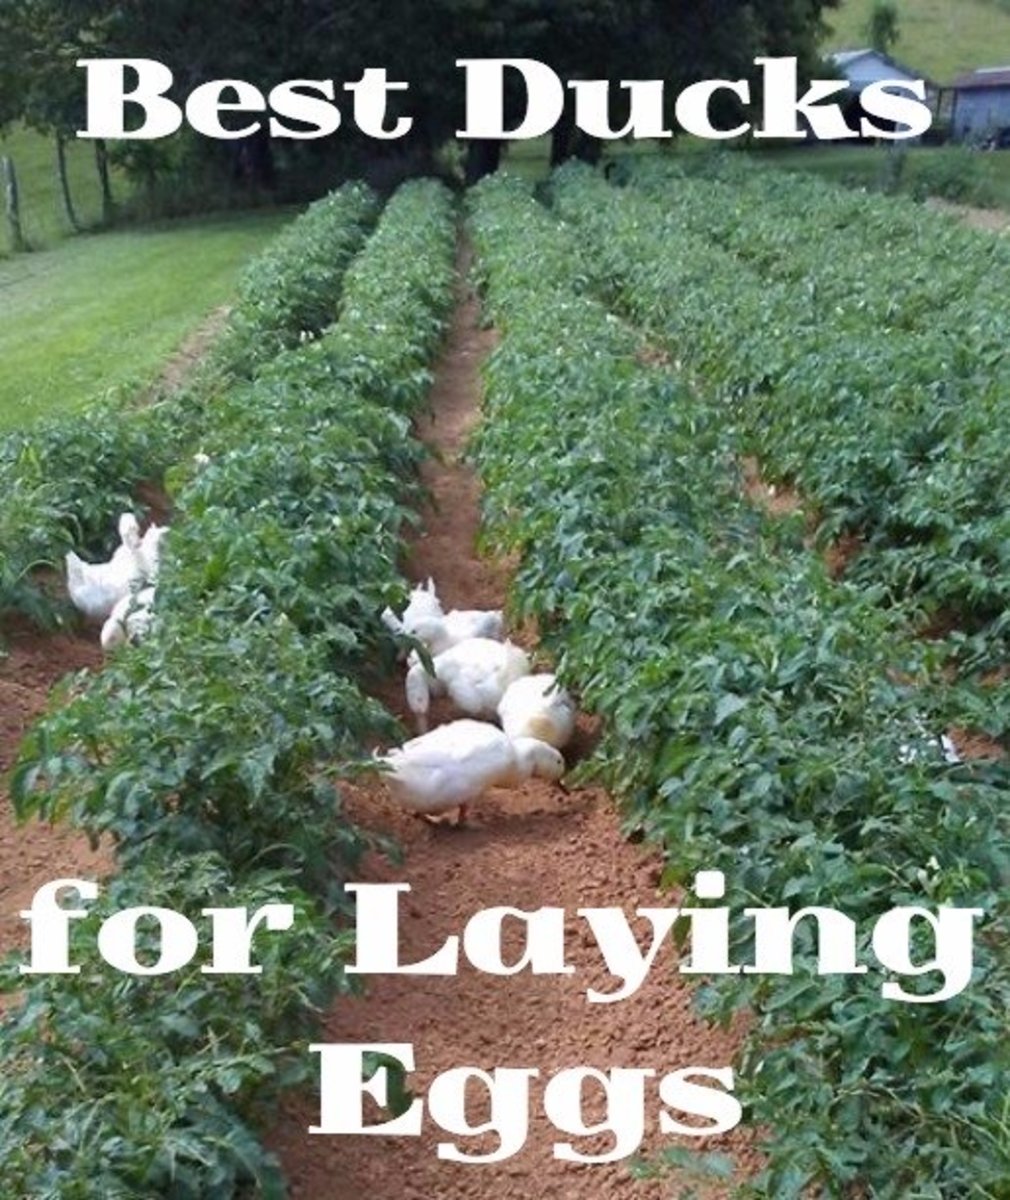 Let's eggsplore the productivity of a few different duck breeds.